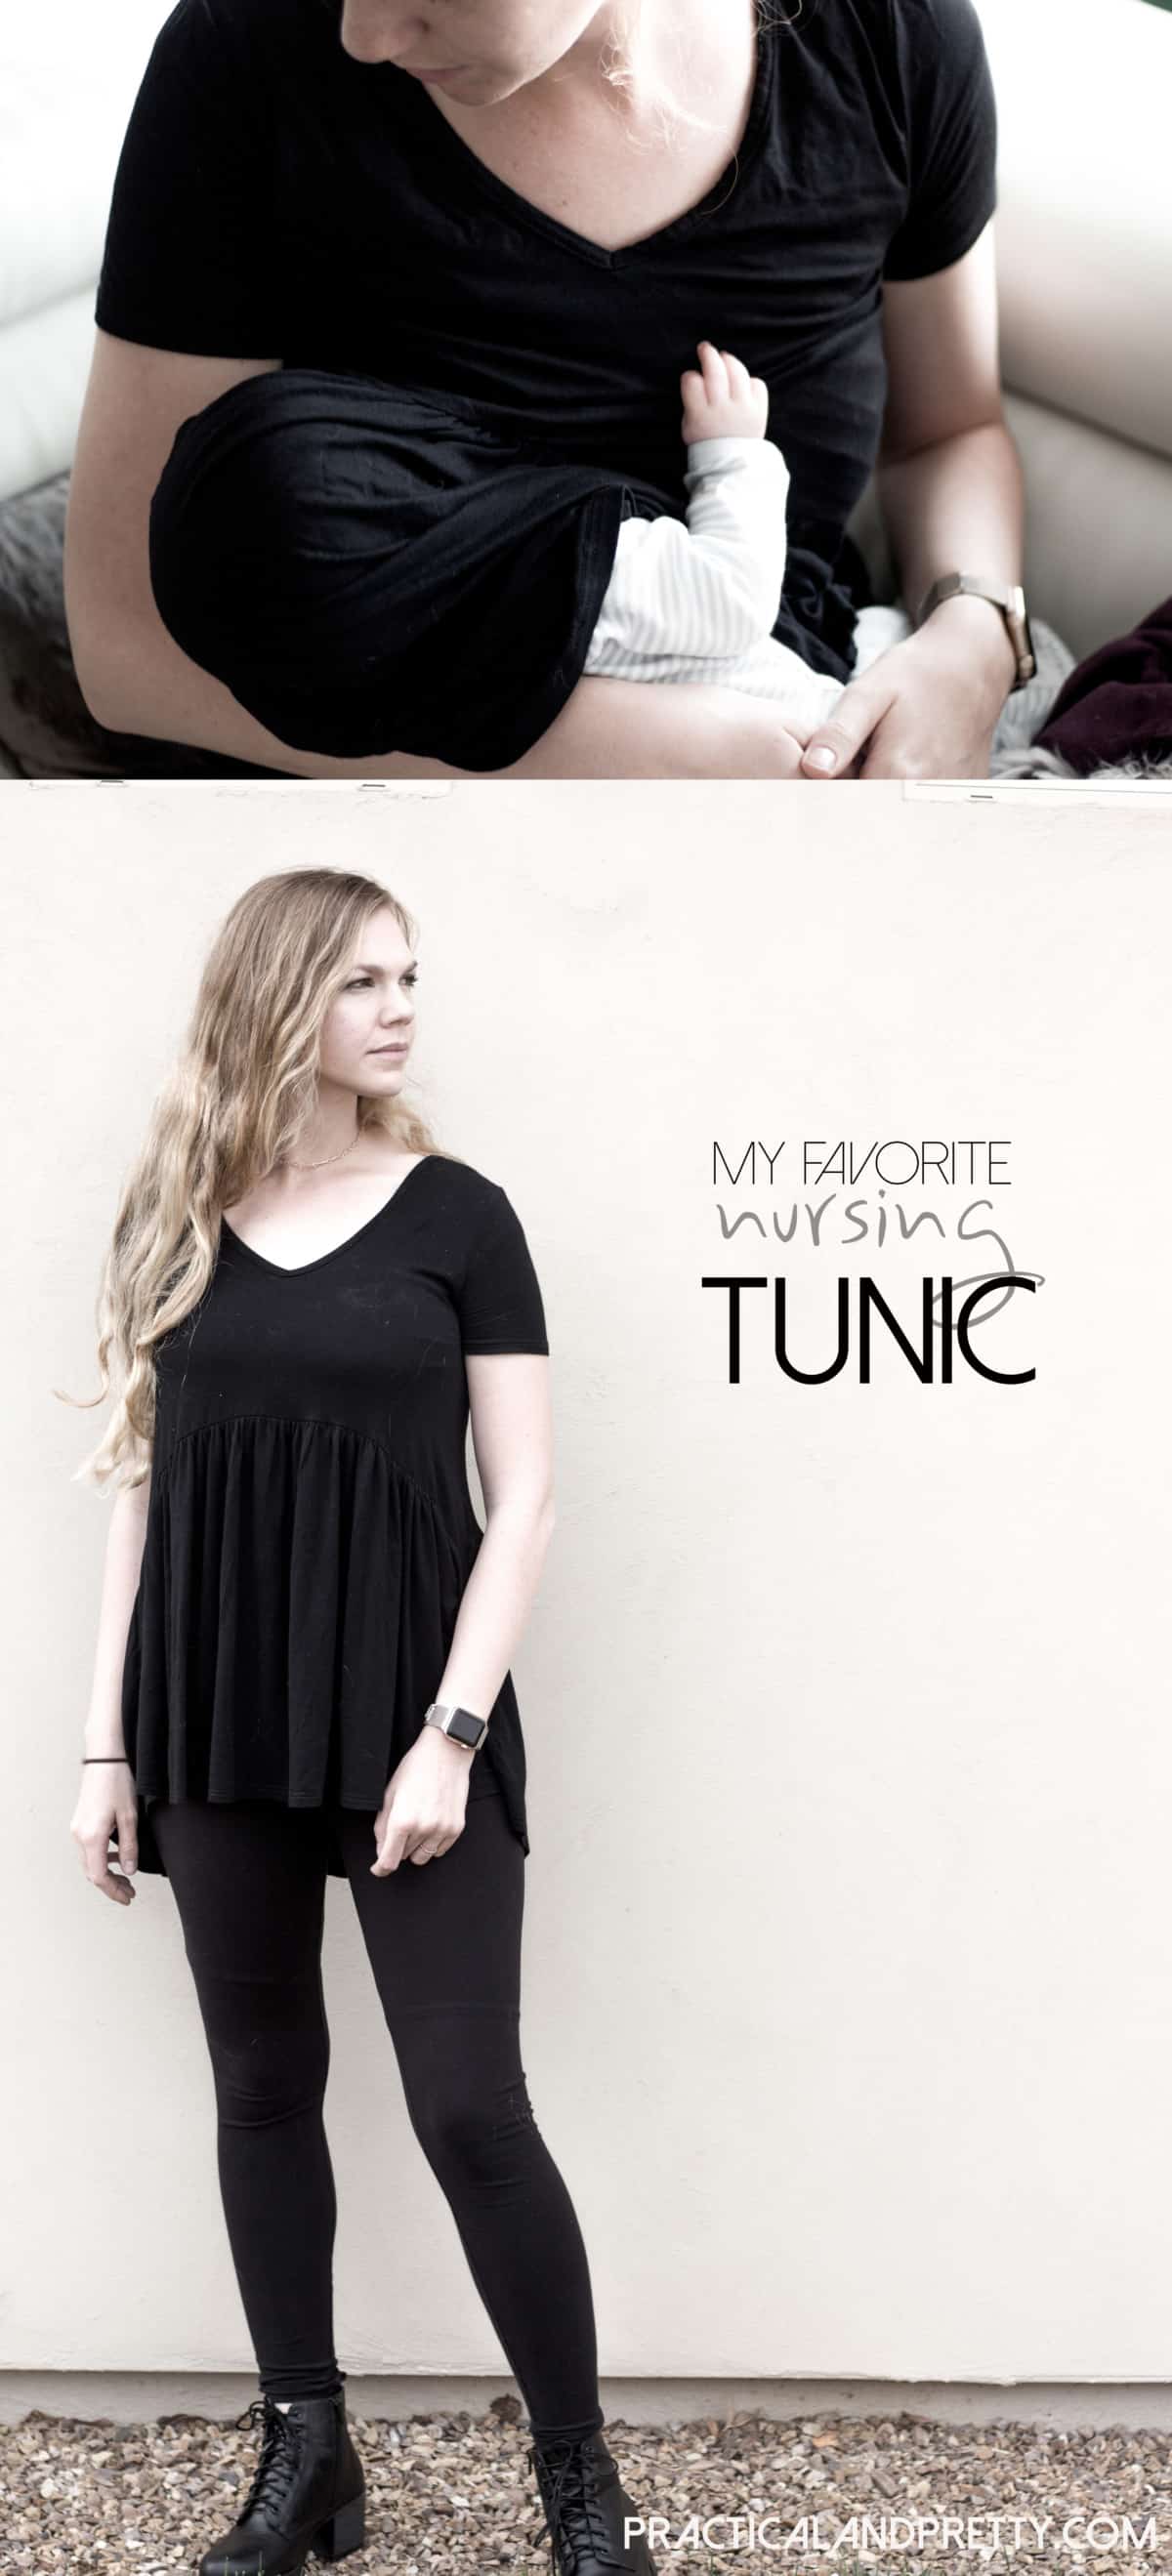 My favorite nursing shirt of all time! I love this little tunic